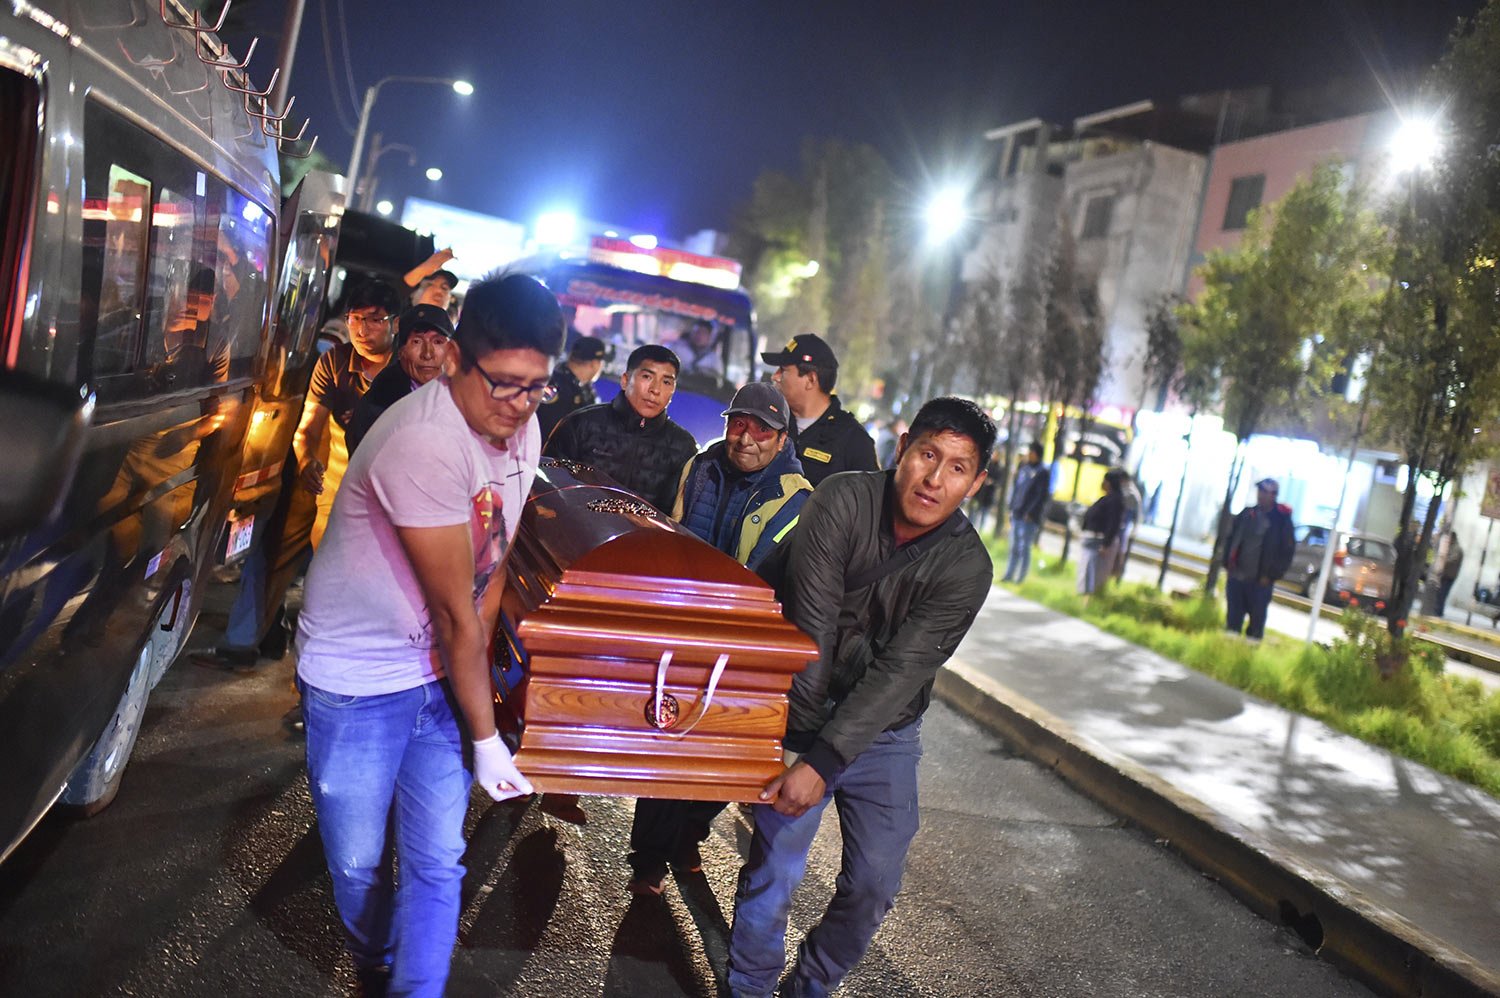  The relatives of miner Clemente Coaquira carry his casket from the morgue in Arequipa, Peru, May 8, 2023. Coaquira was killed during a fire at a gold mine in southern Peru that killed at least 27 workers, Peruvian authorities reported. (AP Photo/Alb